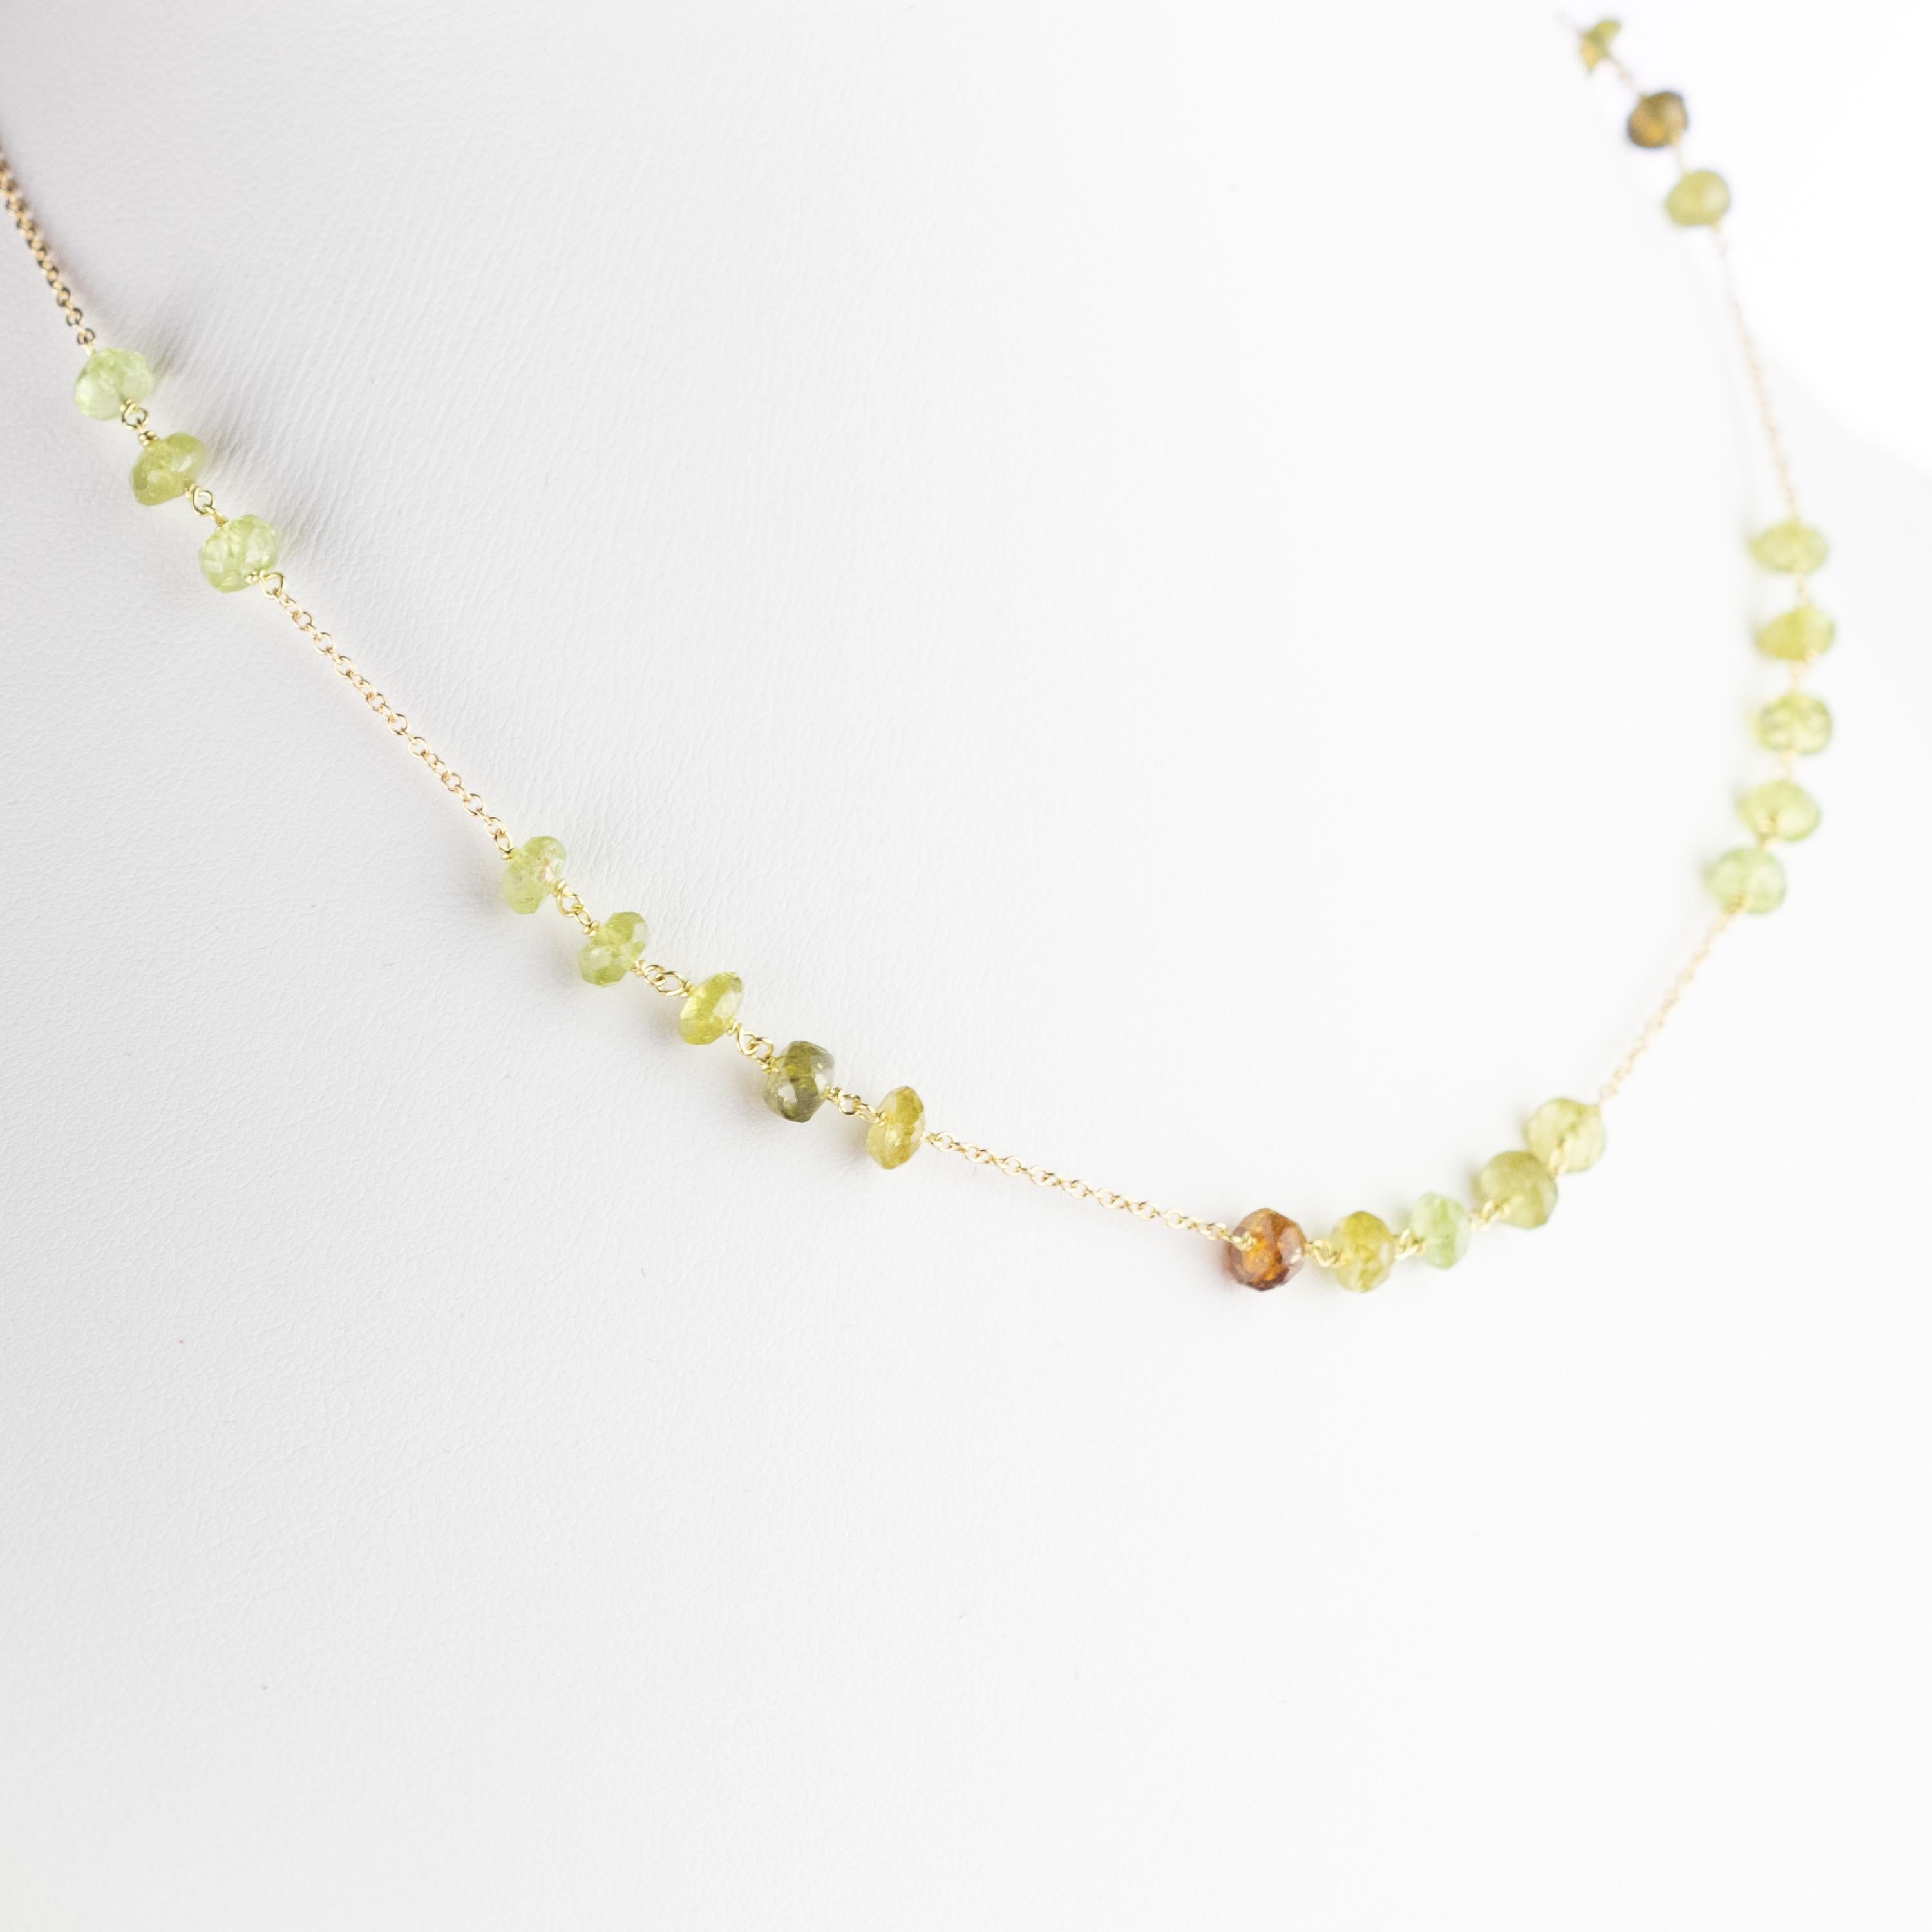 Marvellous necklace starring natural green tourmaline rondelles gems, for a bright charm of uniqueness. Luminous jewel with natural precious jewellery on elegant 9 karat yellow gold setting.

Green represents abundance, renewal, growth and nature.